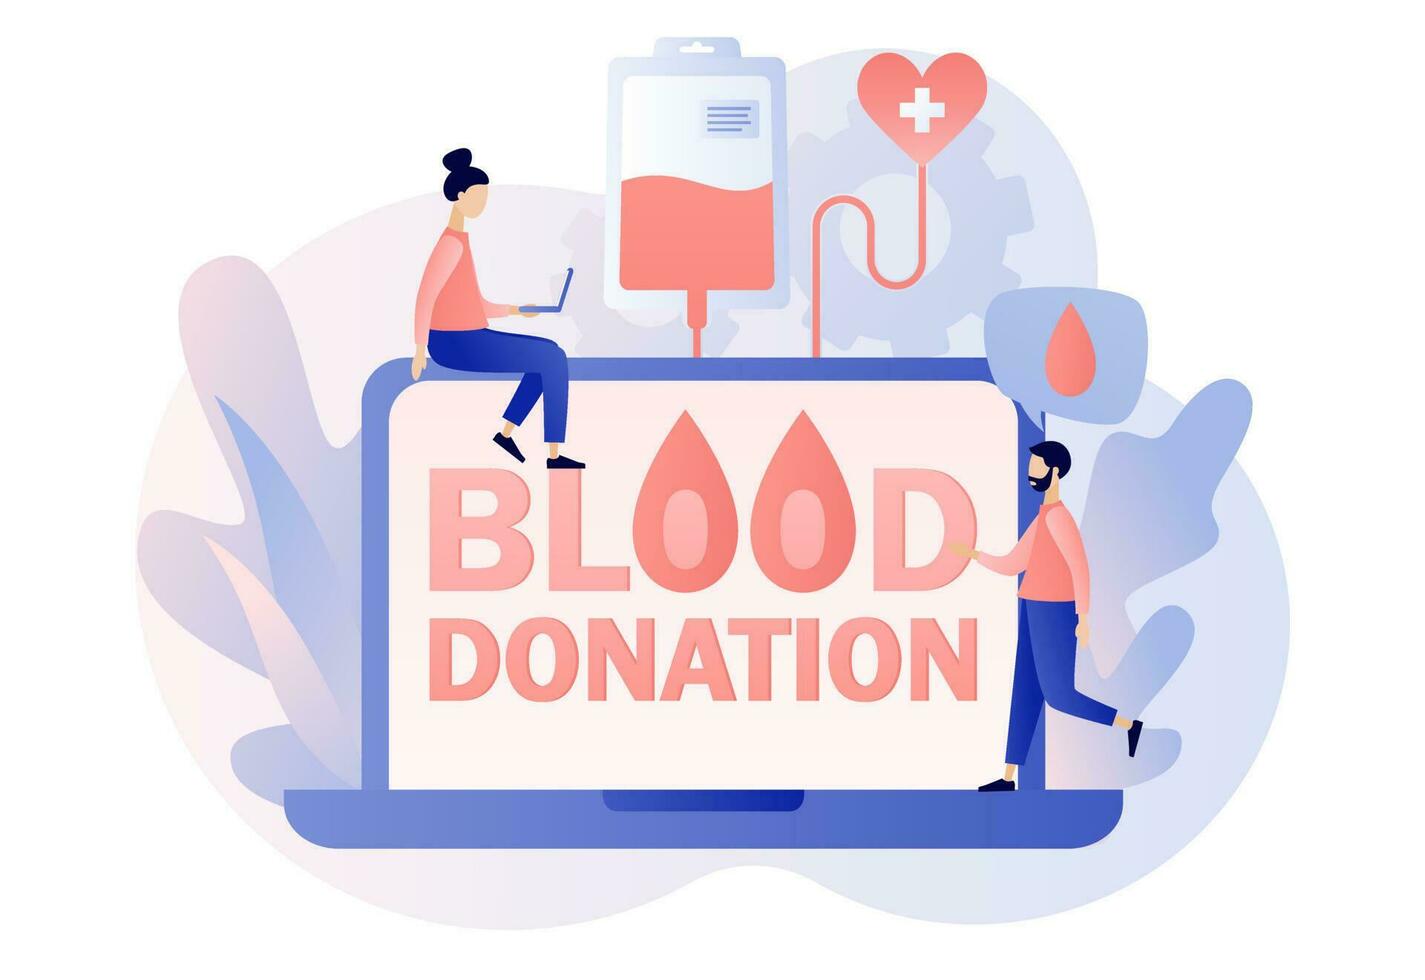 Blood donation - text on laptop screen. Tiny volunteers with nurses donating blood in hospital. Blood test or analysis. Health care. Modern flat cartoon style. Vector illustration on white background